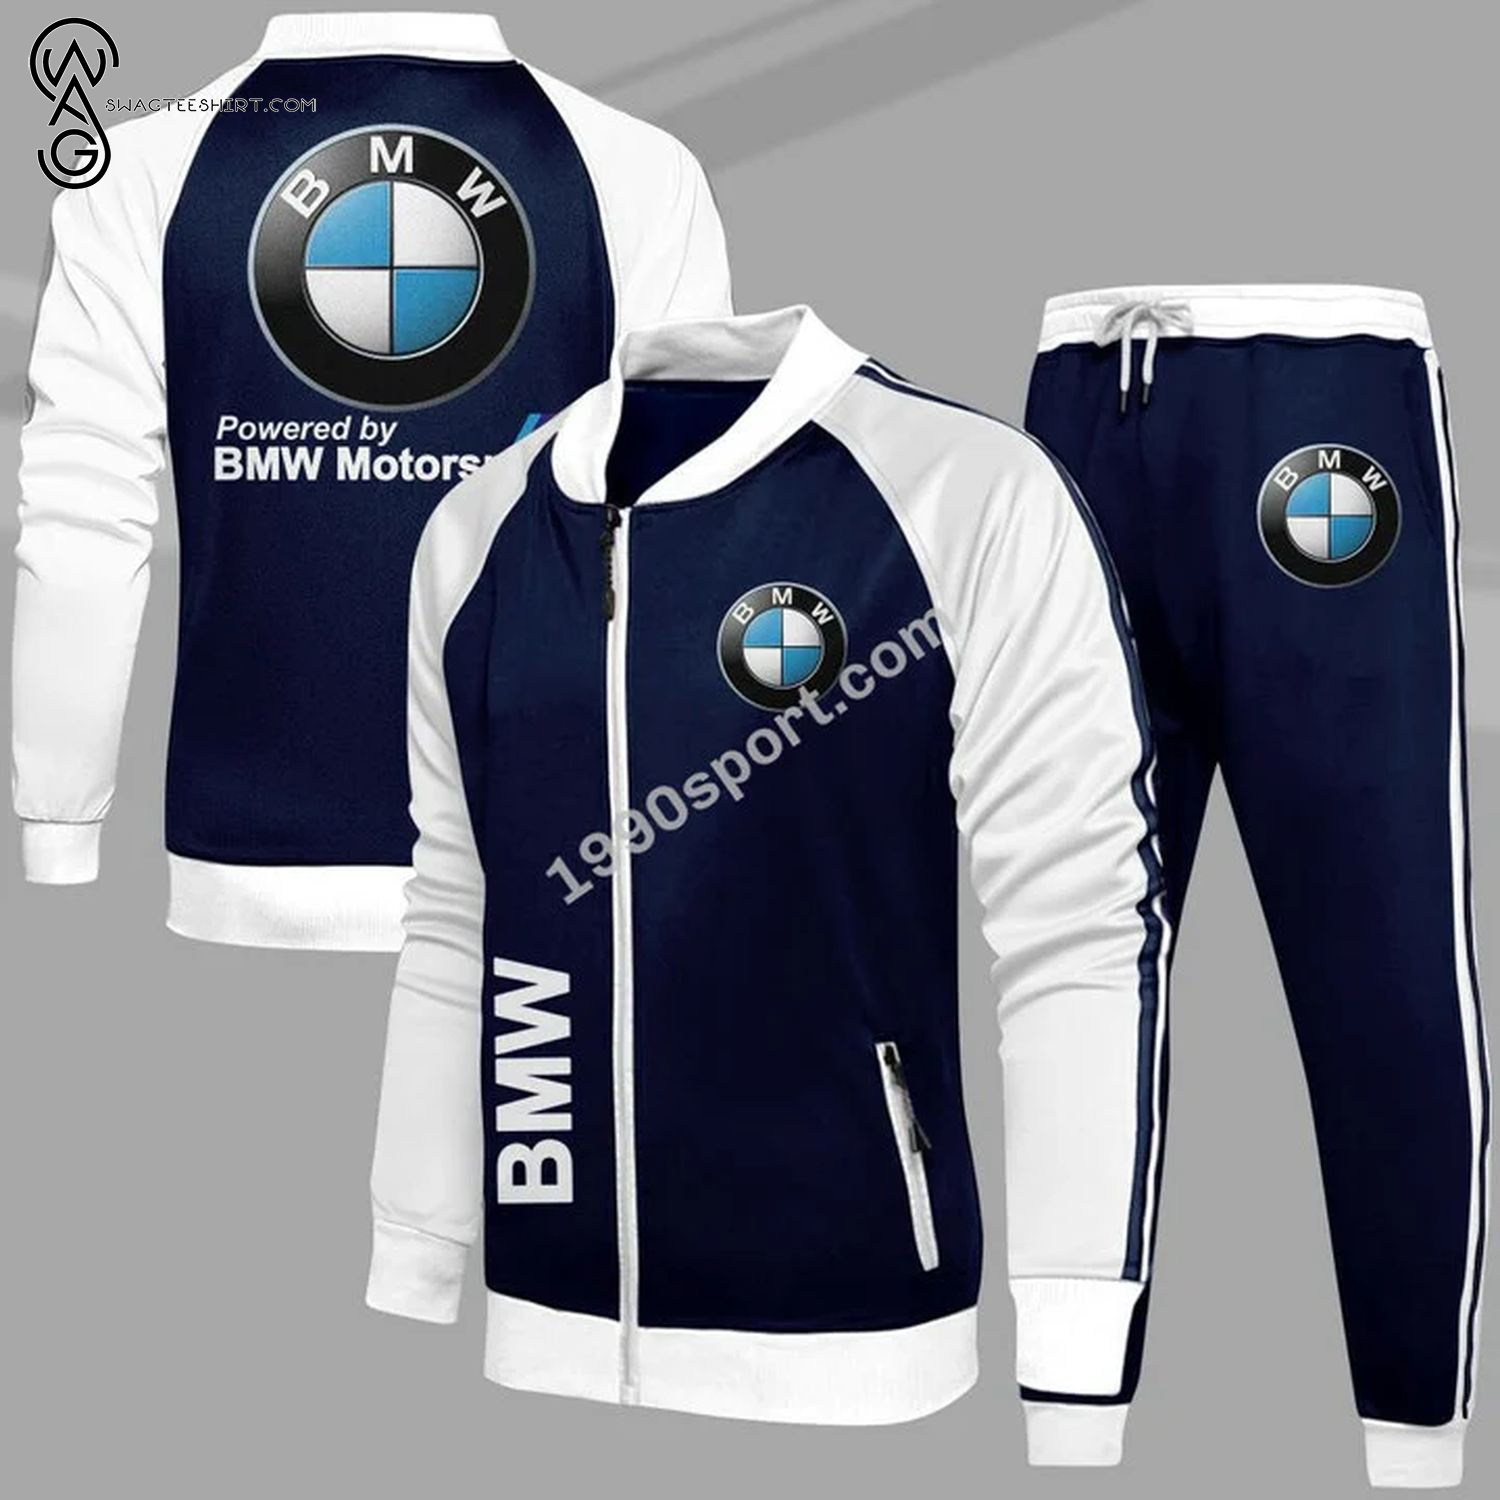 Real product photo Bmw Tracksuit M Power Superb high quality